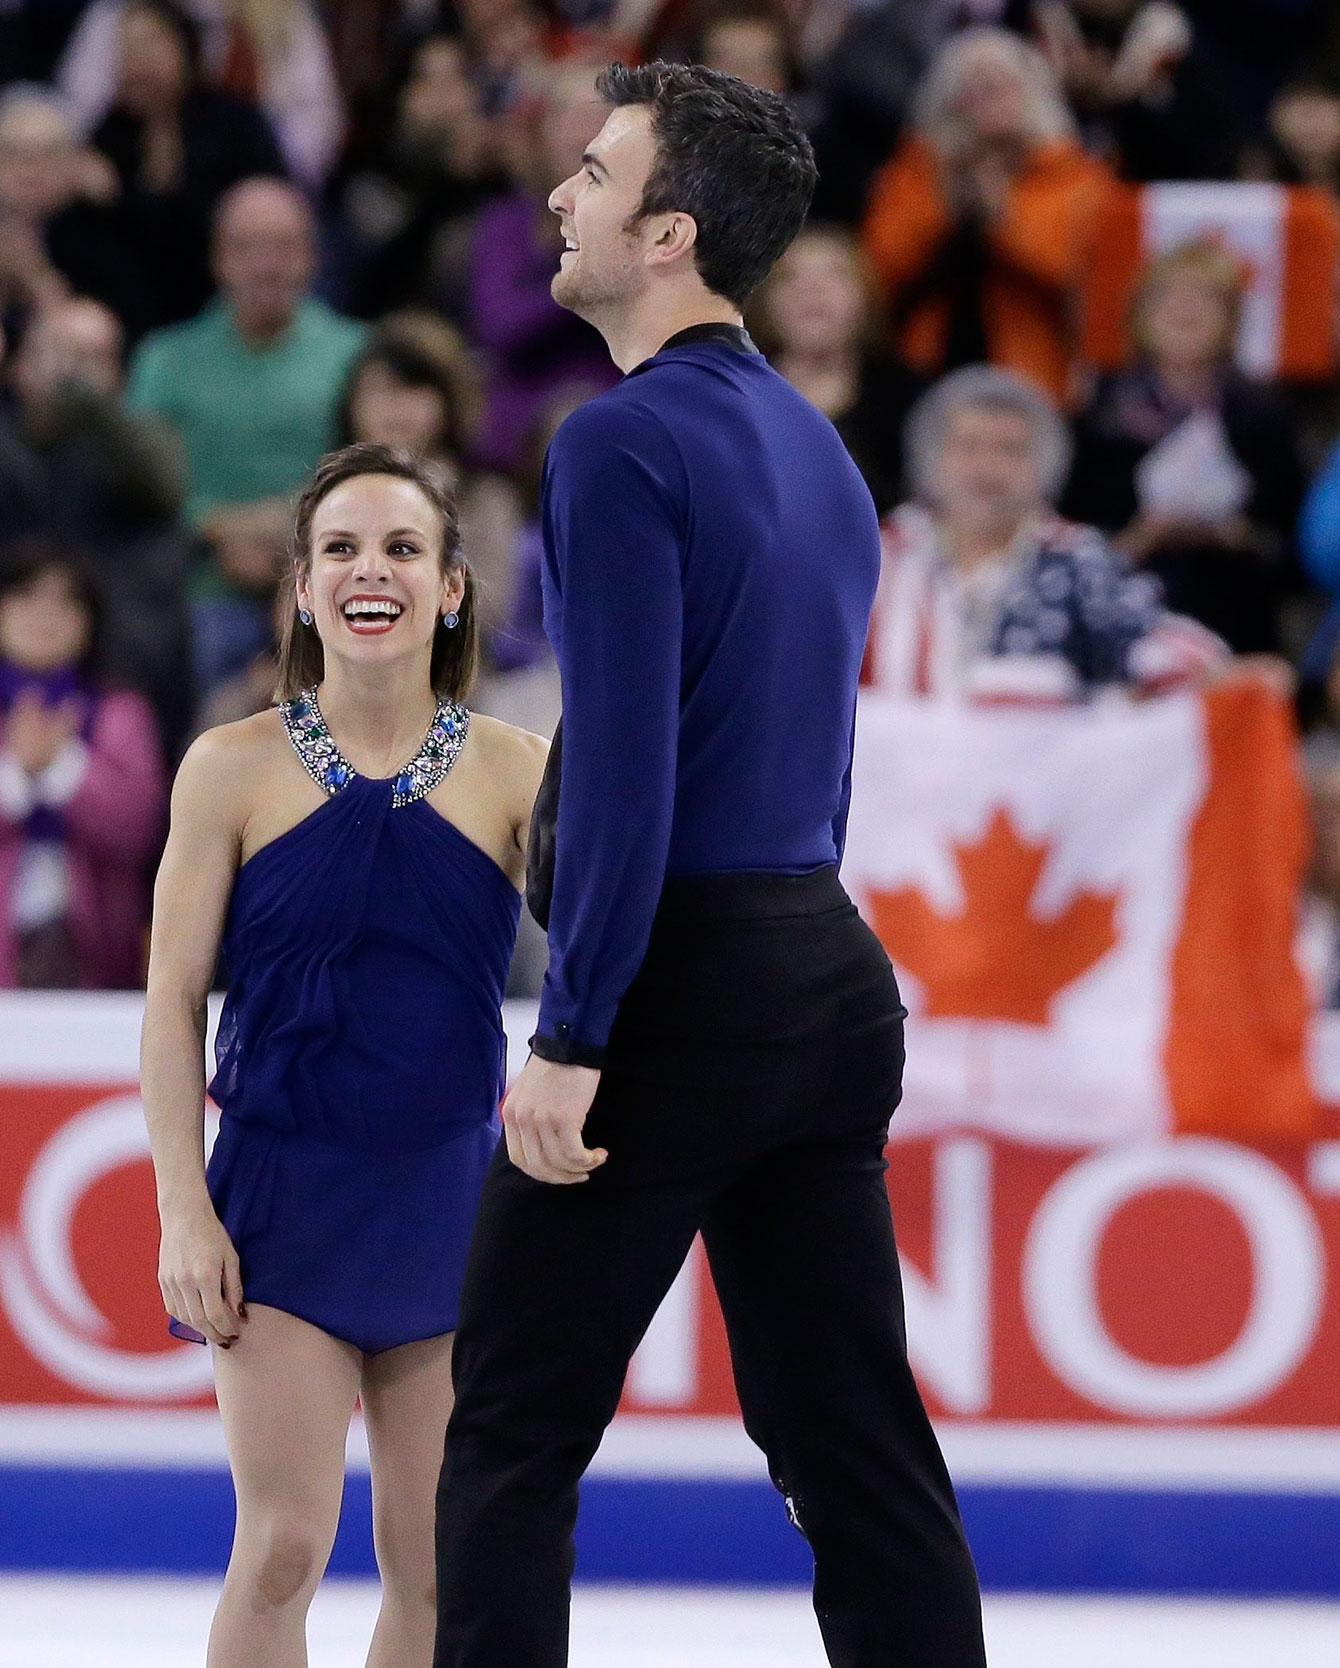 Meagan Duhamel and Eric Radford show relief after a monstrous performance in the free skate at the ISU Speed Skating World Championships on April 2, 2016. 